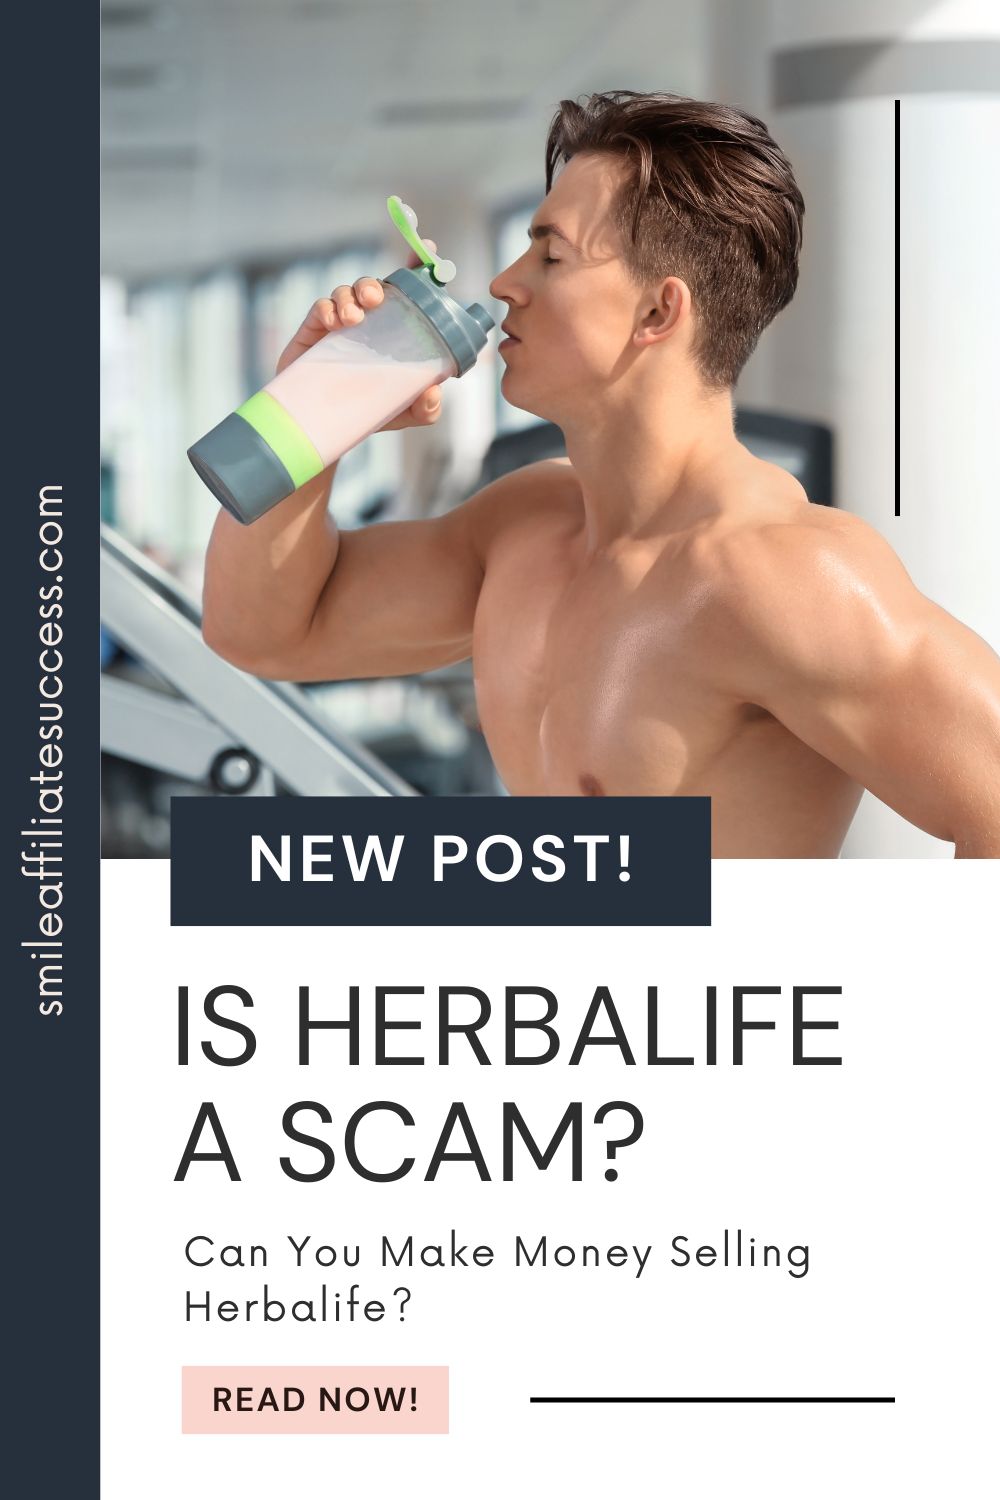 Should I Join Herbalife?